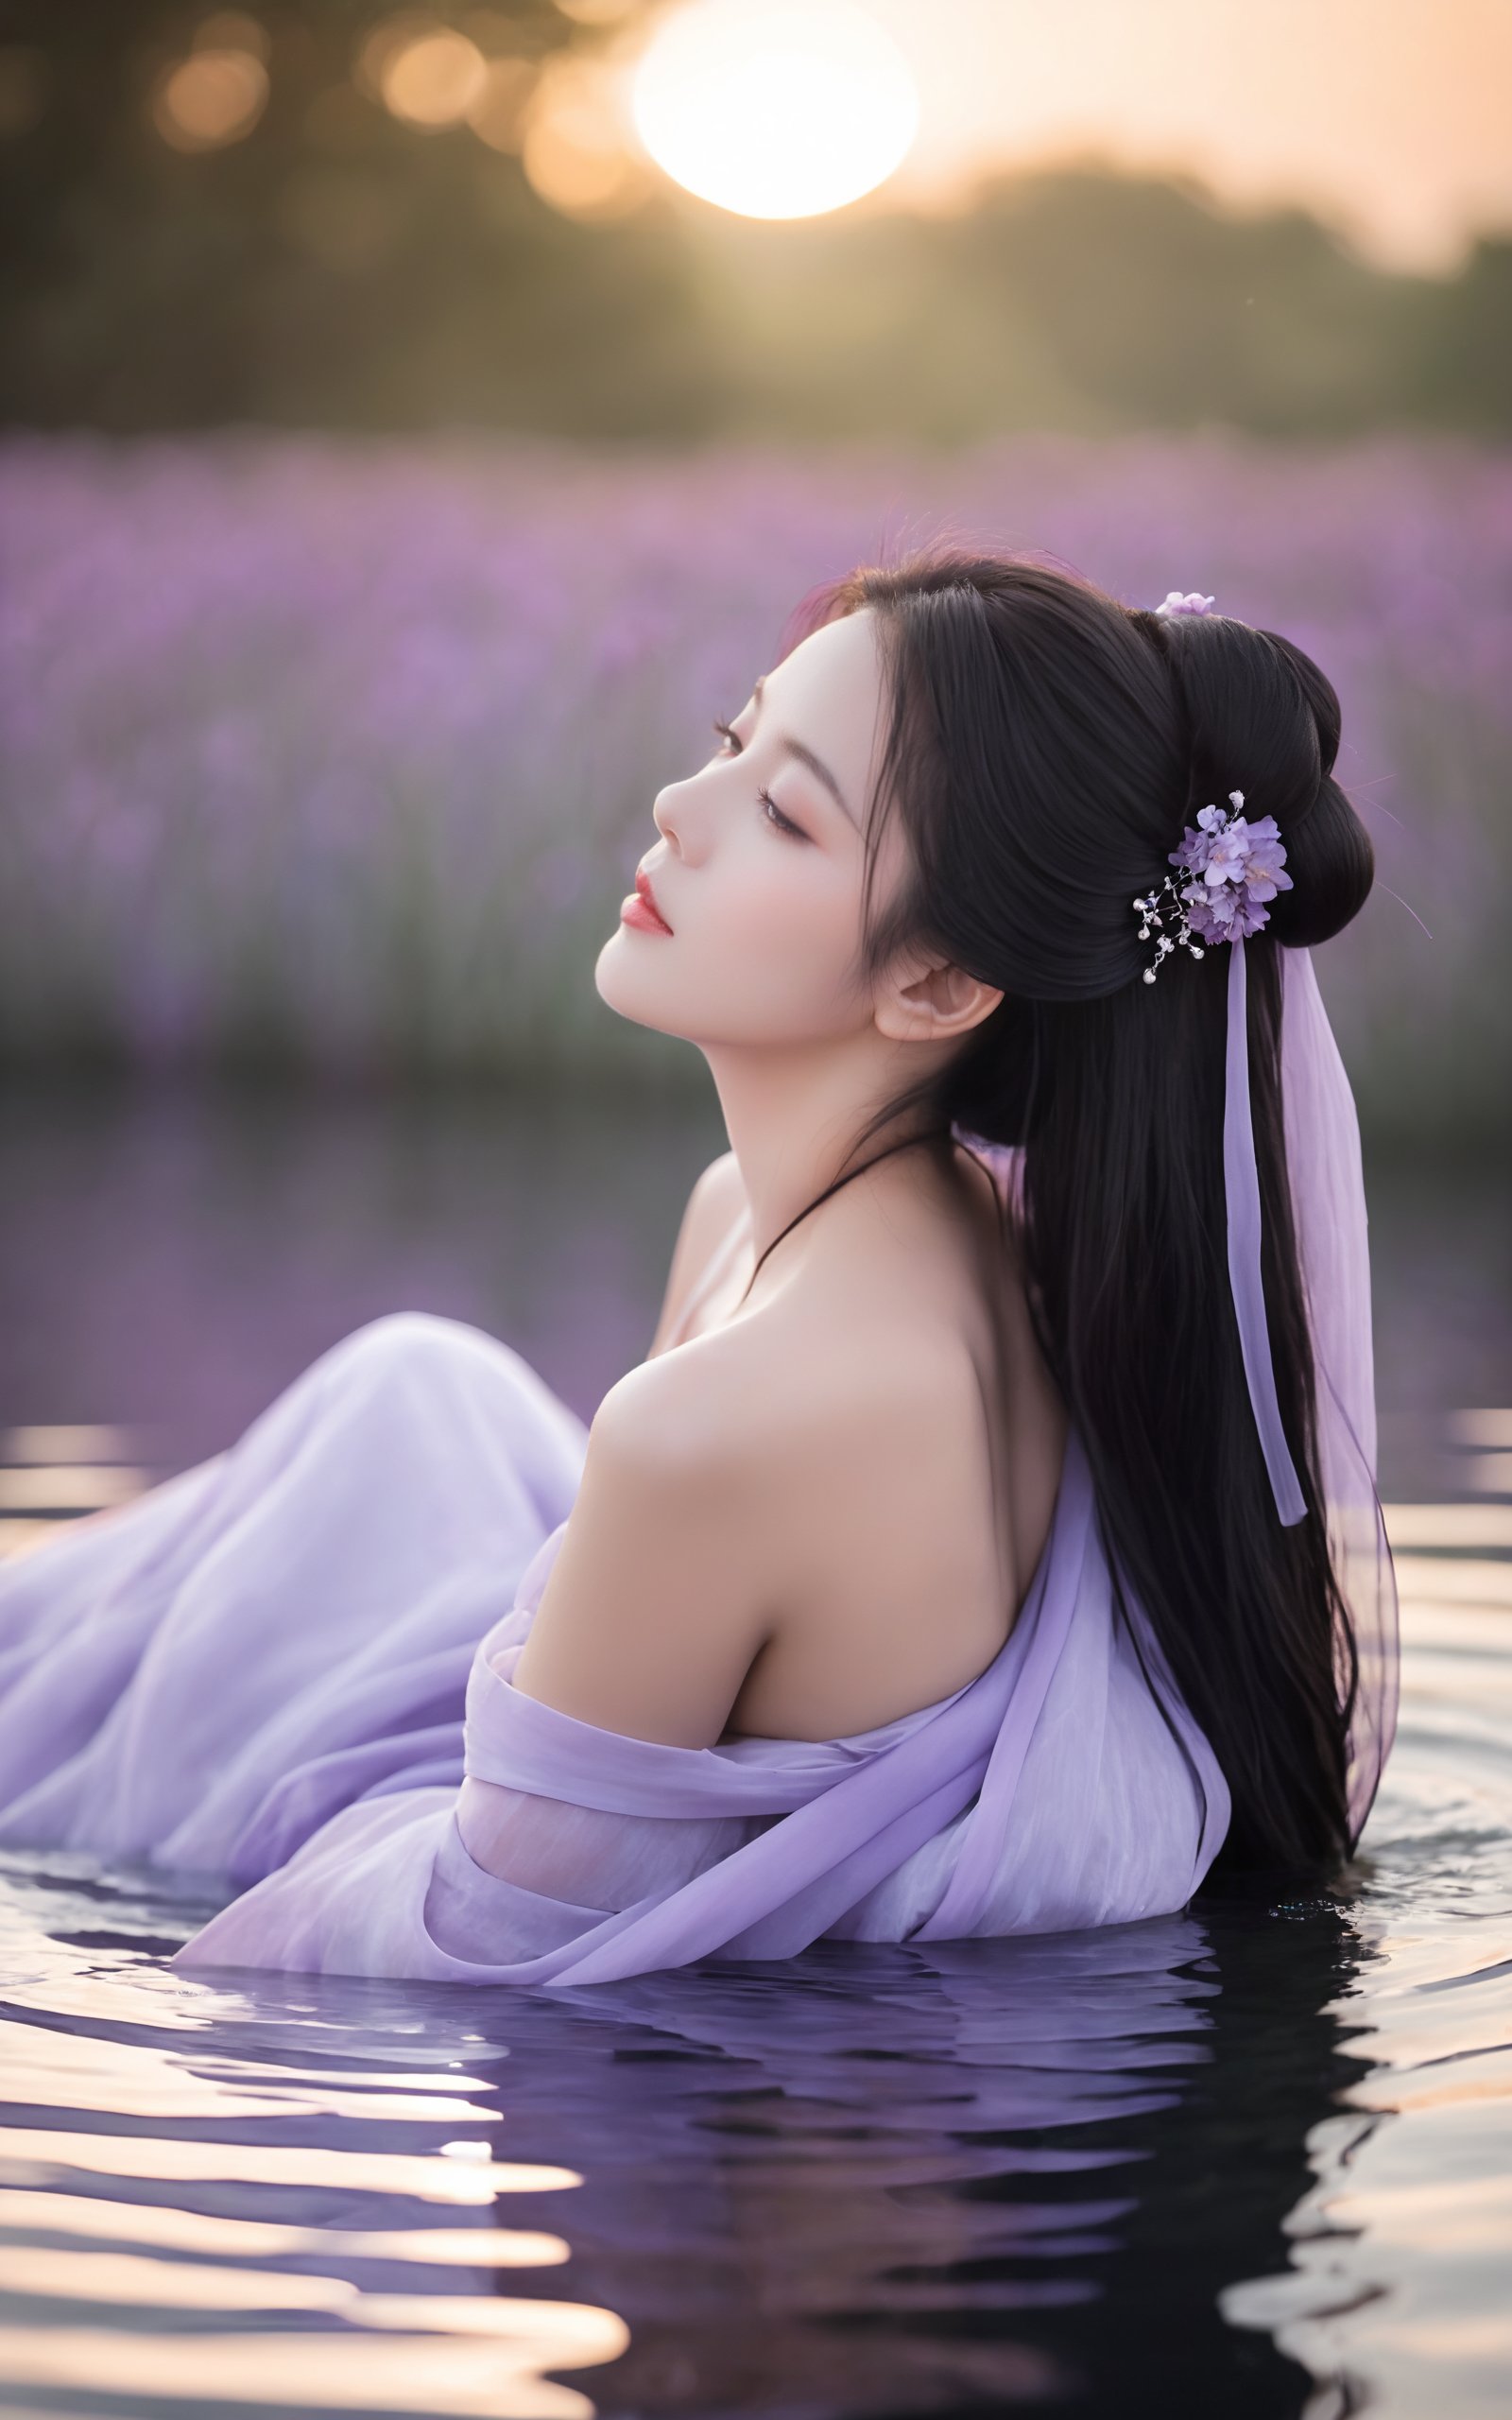 Under the caress of the moon, a woman bathes in a tranquil pool, her Hanfu of lavender a vision of tranquility. The water's gentle lapping against her skin is echoed by the soft mist that rises, creating a veil that obscures yet reveals. The scent of the night mingles with the light fragrance of the lavender, wrapping her in a cocoon of serene sensuality.